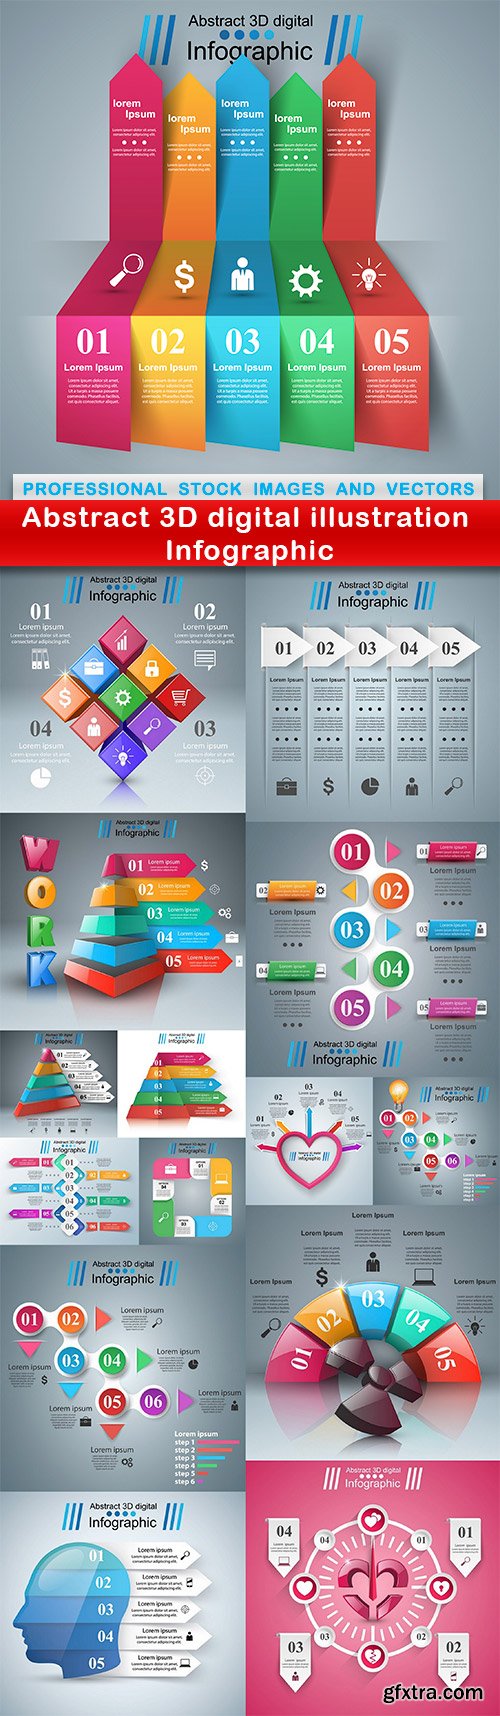 Abstract 3D digital illustration Infographic - 15 EPS